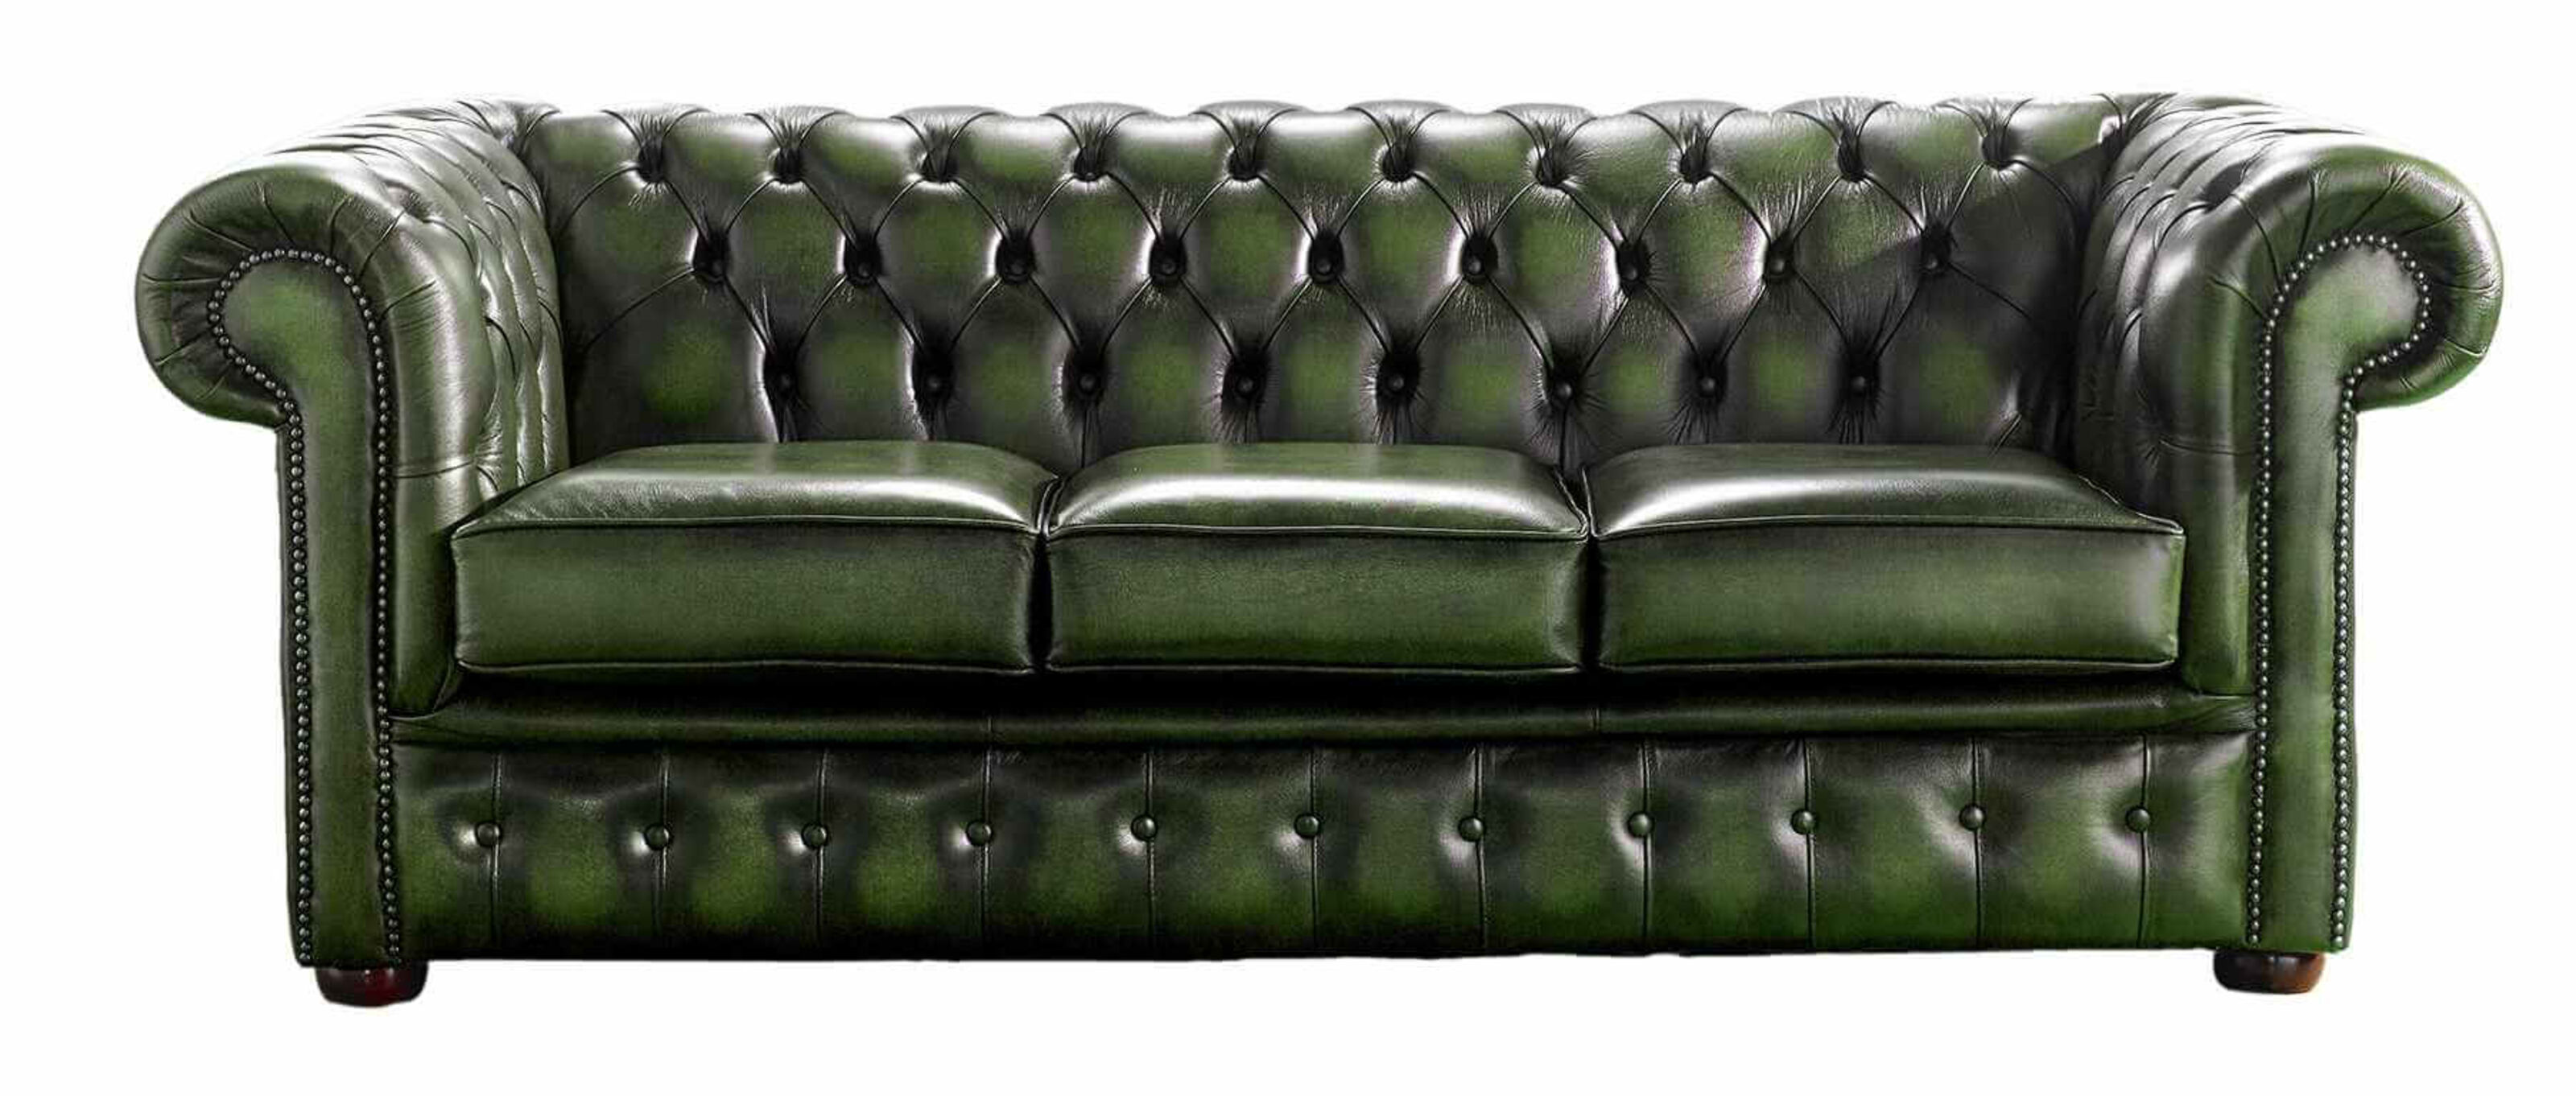 The Ultimate Guide to Buying Leather Sofas: Why and How  %Post Title